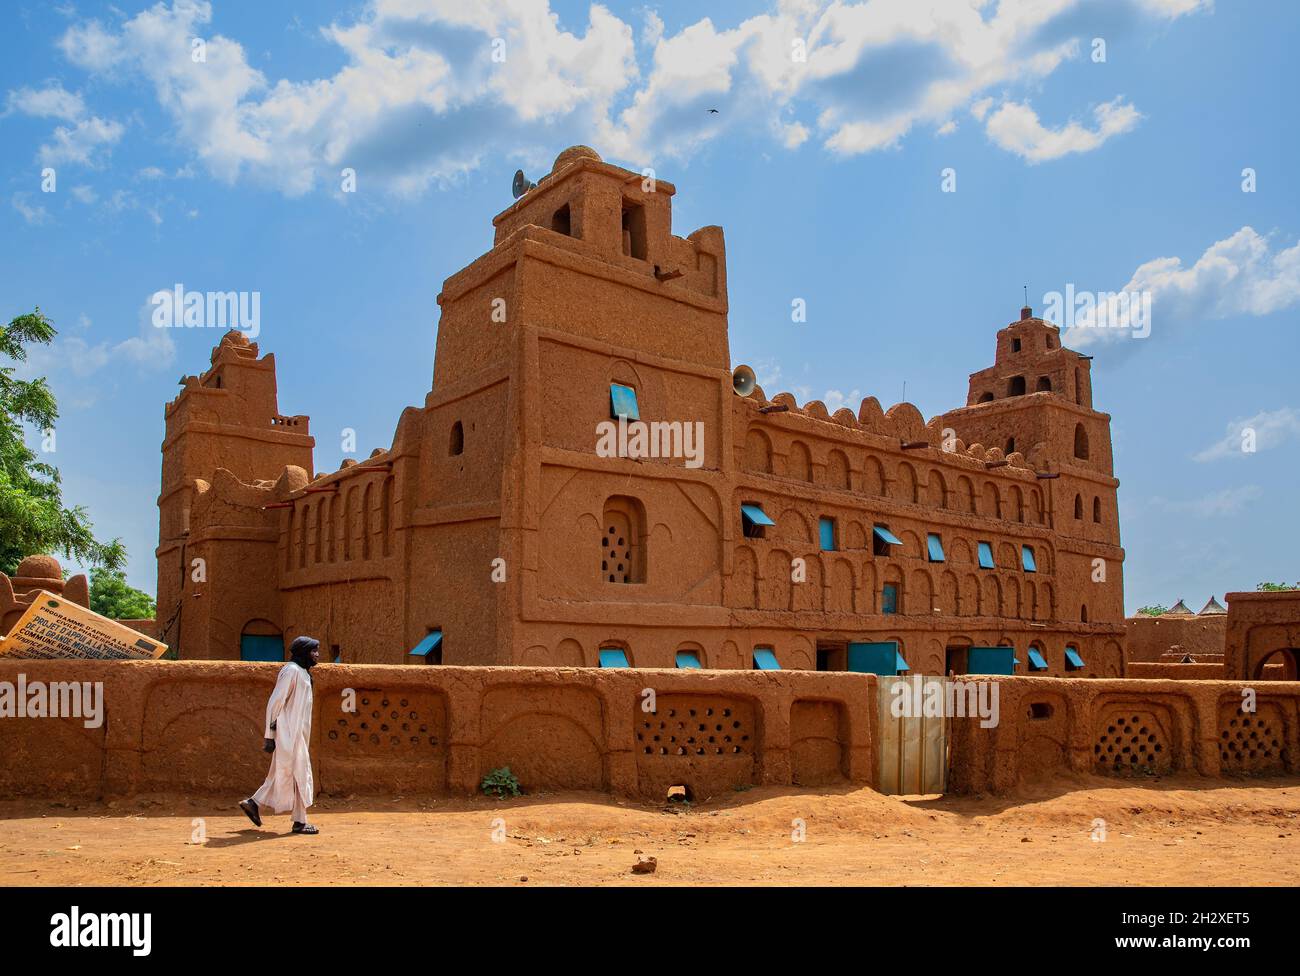 A Great Mosque Yamma village in Niger Stock Photo